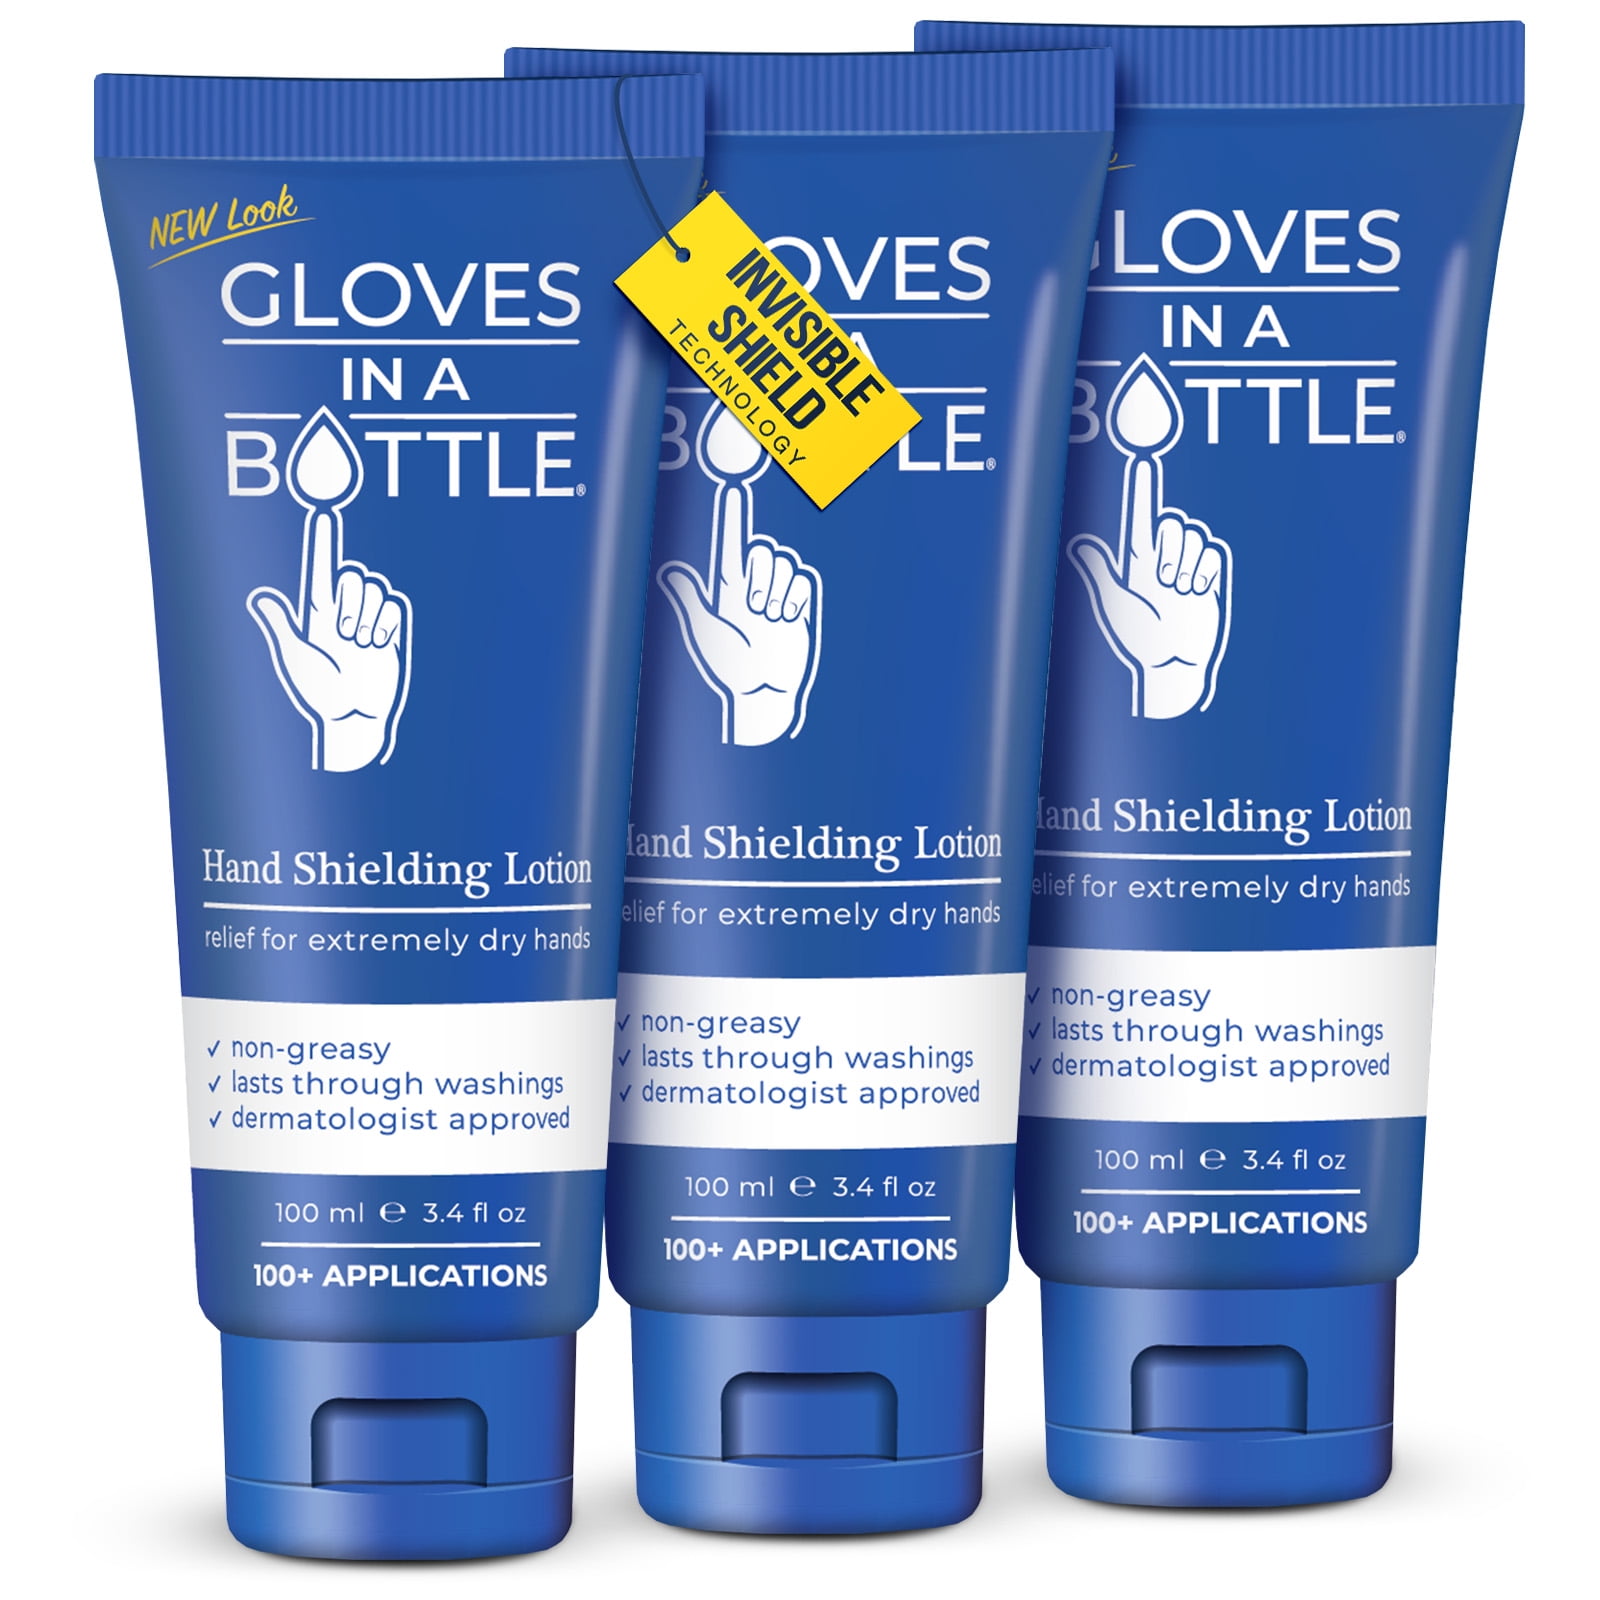 Gloves in A Bottle - Shielding Lotion for Dry Skin, Hand Lotion Travel size, Protects & Restores Dry Cracked Skin 3.4 fl oz Pack of 1, Botanical